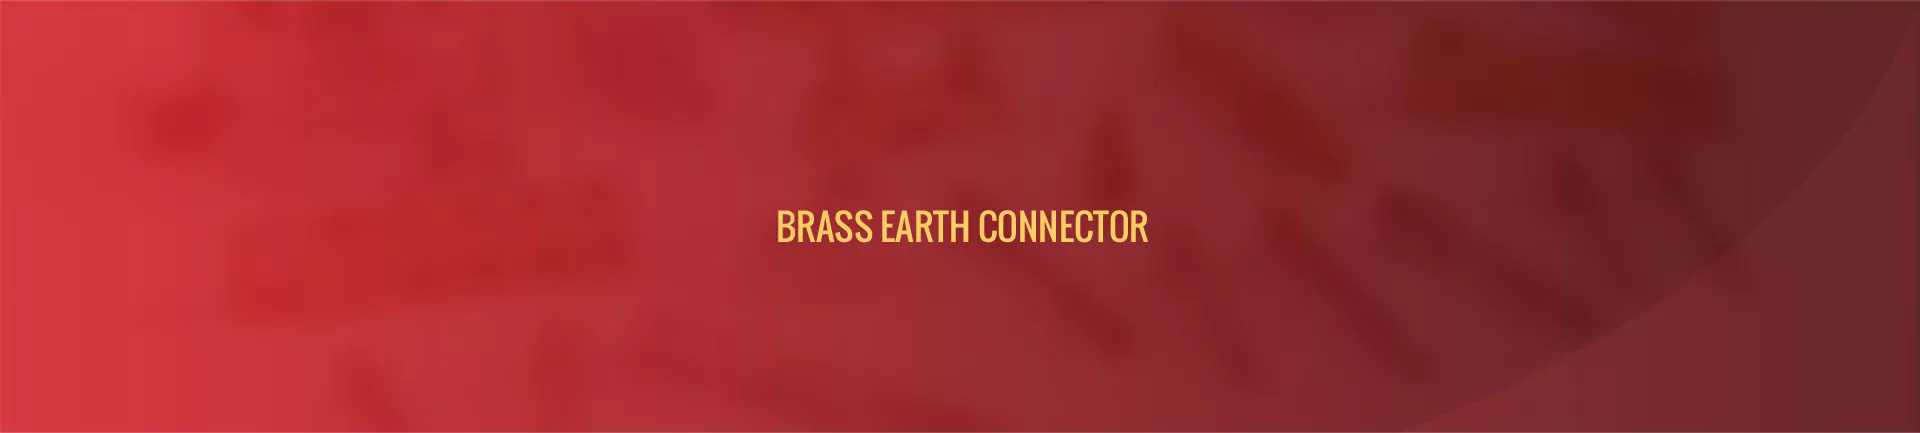 brass-earth-connector-banner